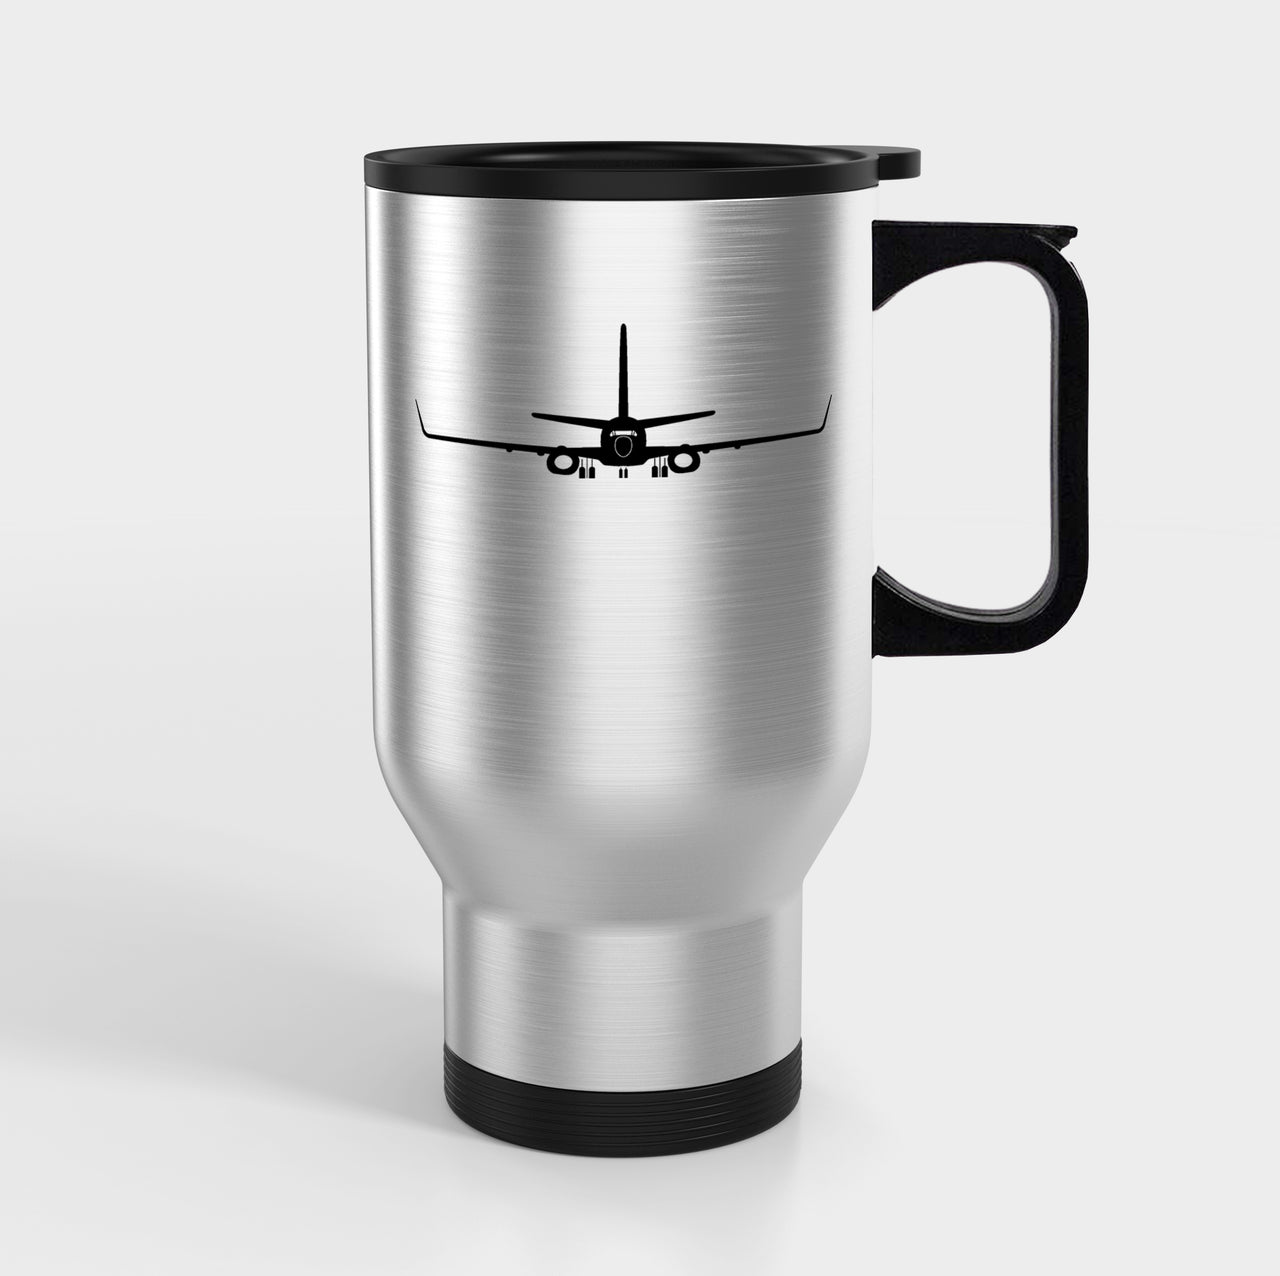 Boeing 737-800NG Silhouette Designed Travel Mugs (With Holder)